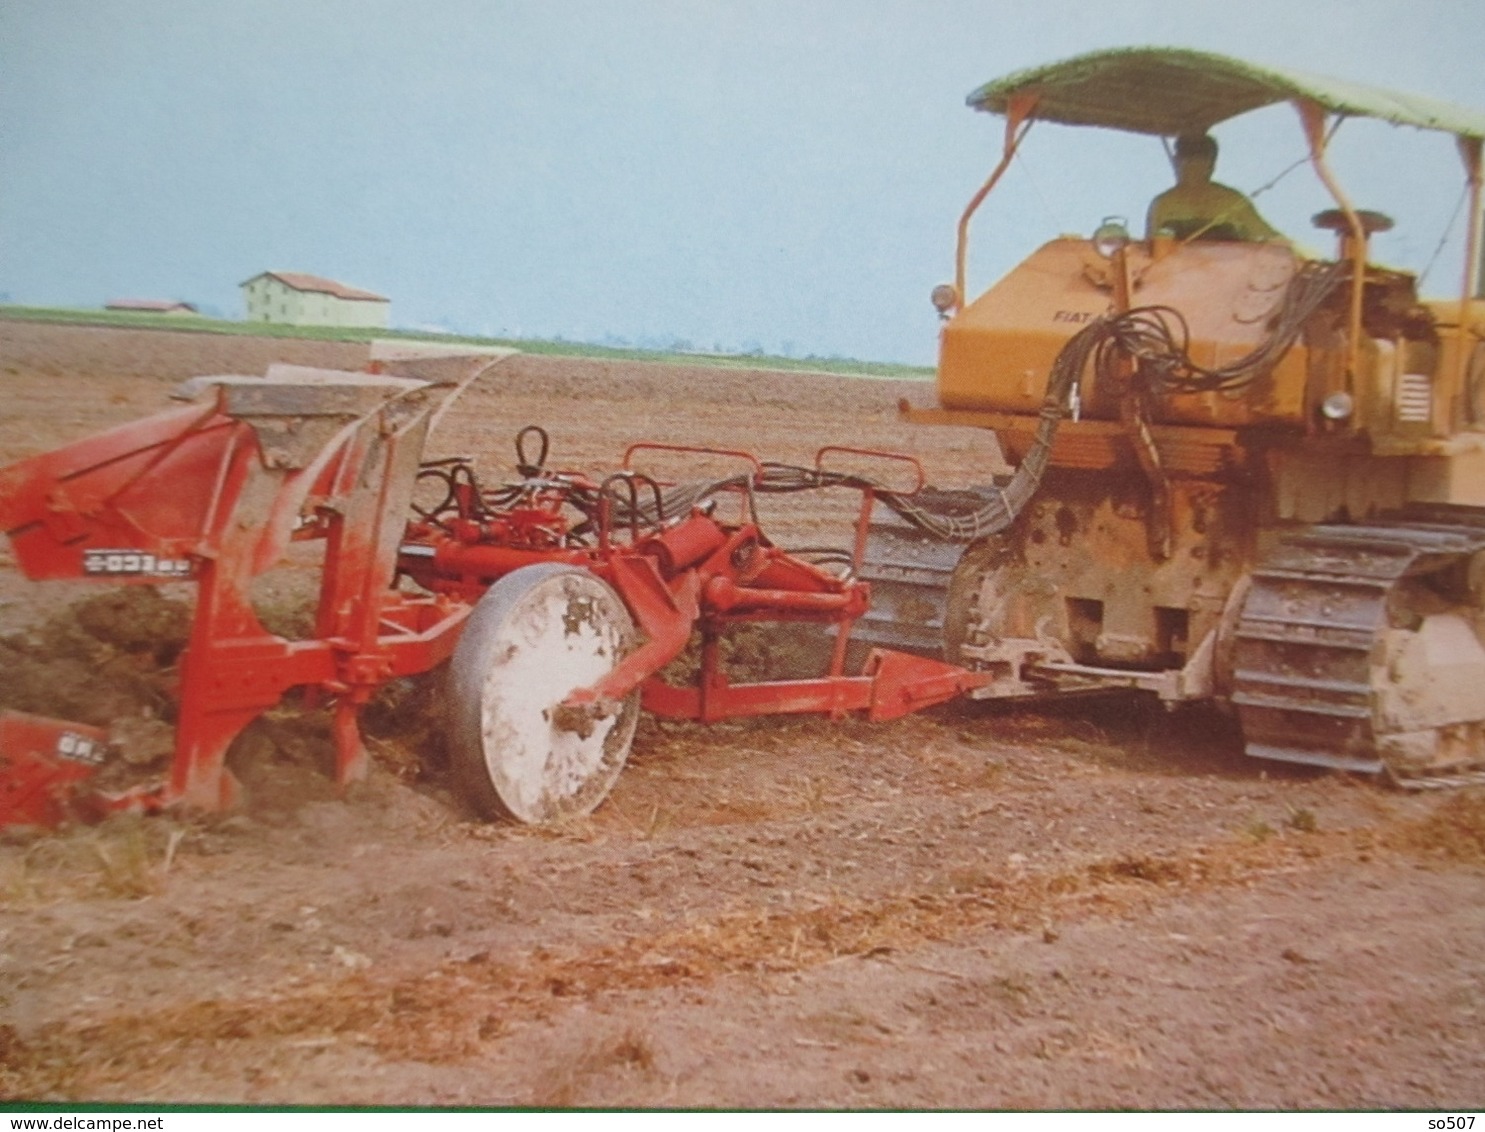 Greco Machine-Types Of Fiat Tractor, Agricultural Machines- Catalog, Prospekt, Brochure- Italy - Tractores